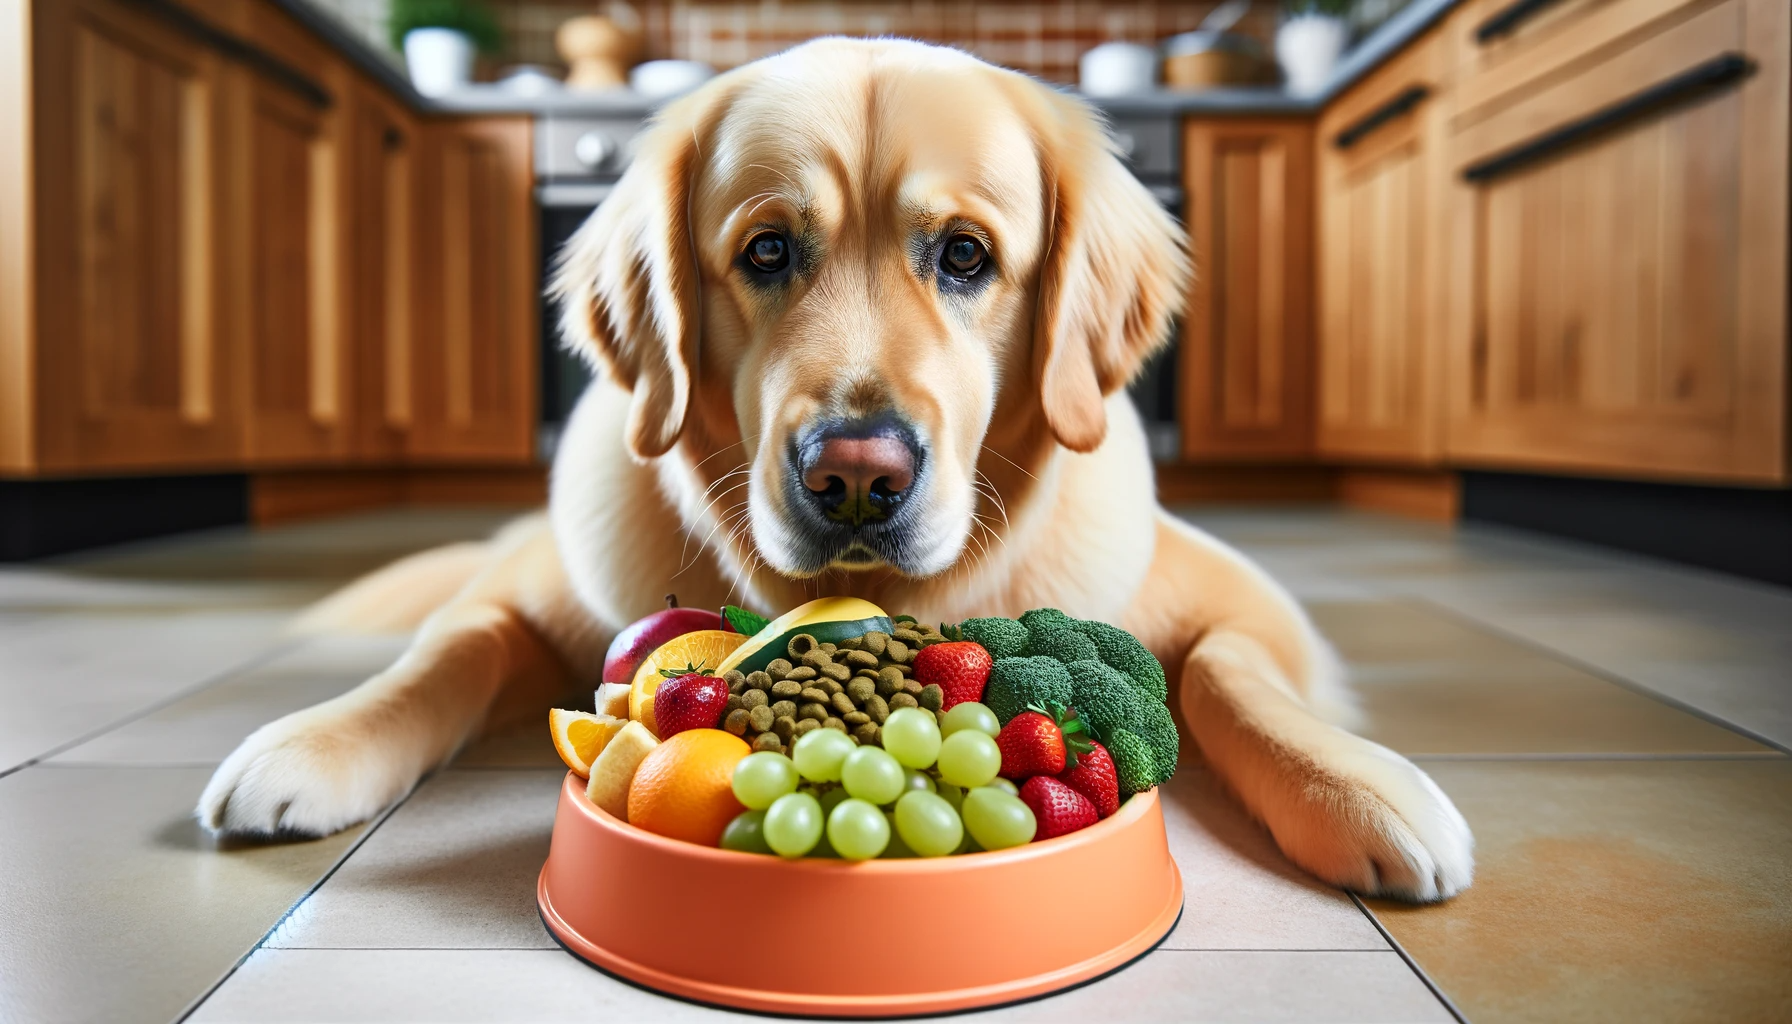 A Goldador munching on a colorful bowl of kibble, fruits, and veggies, looking like a true foodie